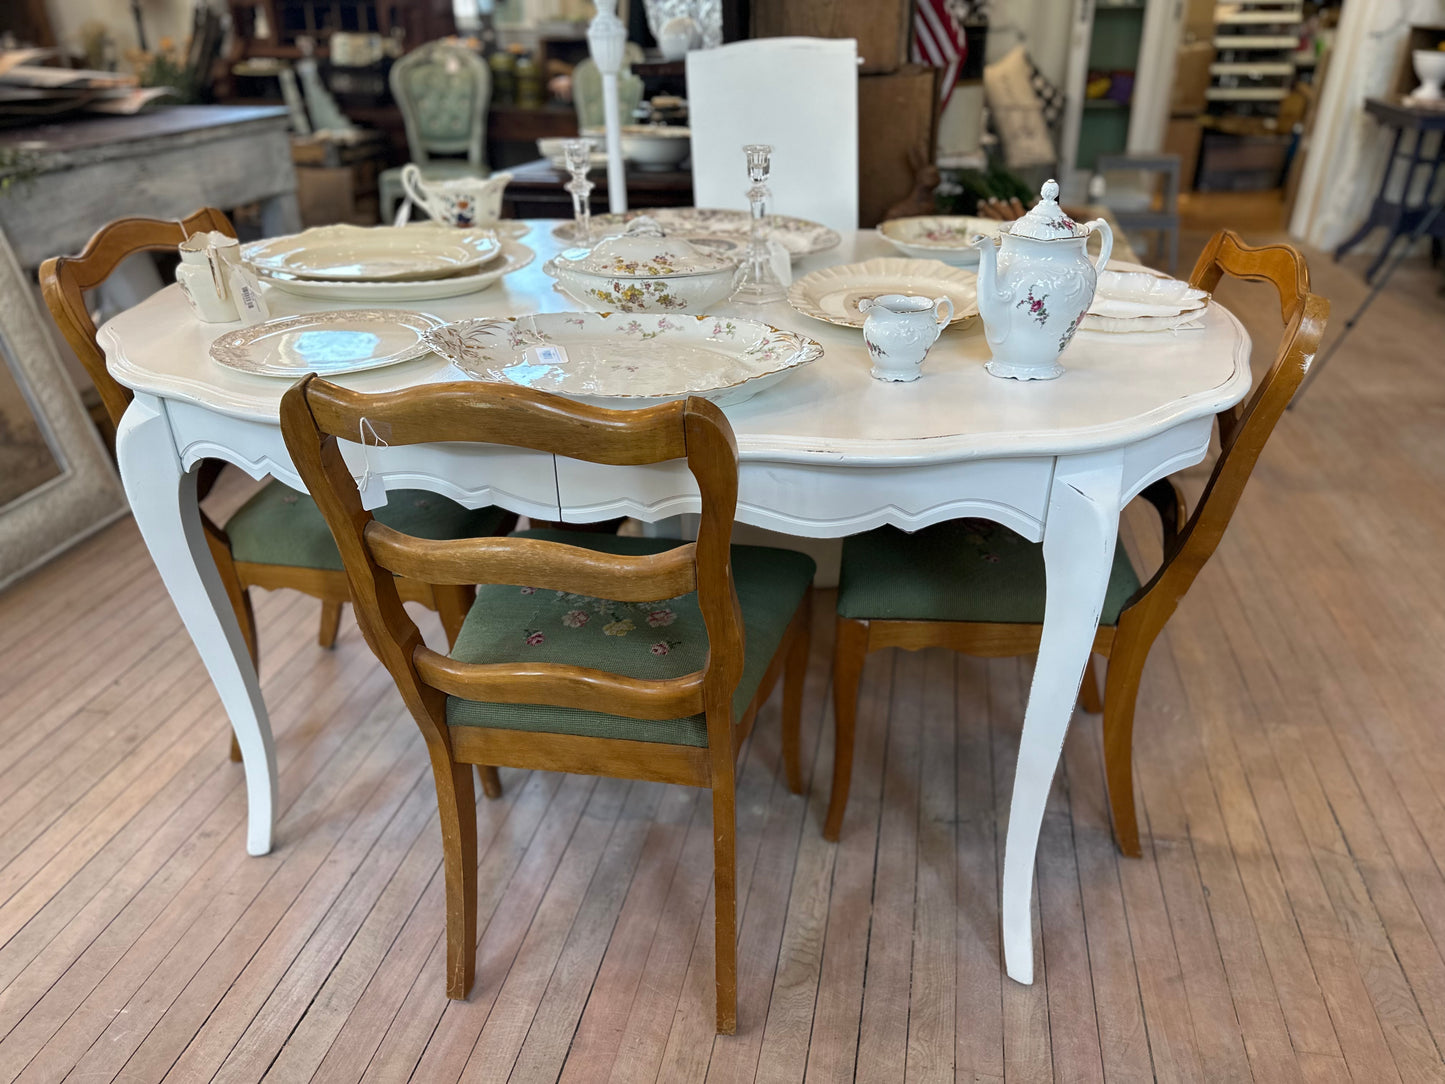 White French Provincial Table with one leaf